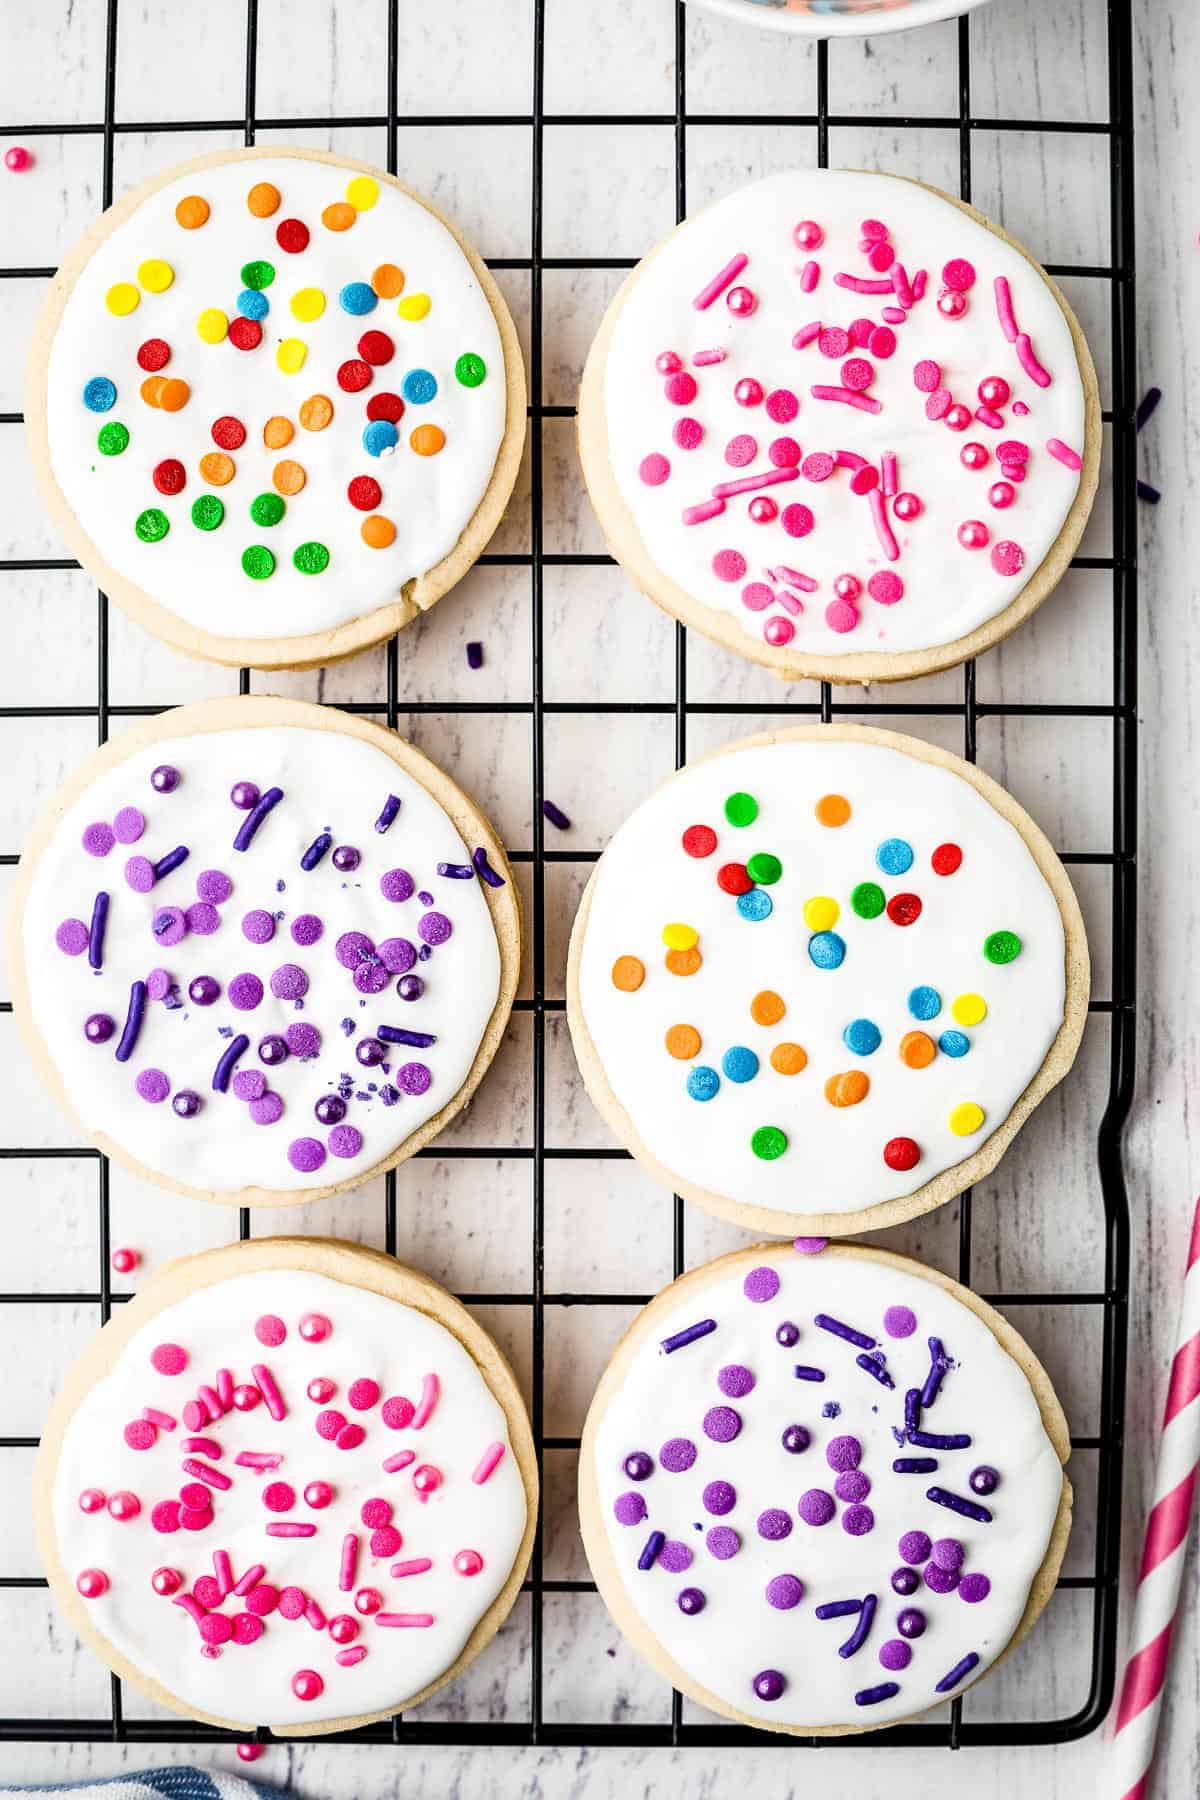 Round sugar cookies on baking rack decorated with royal icing and sprinkles